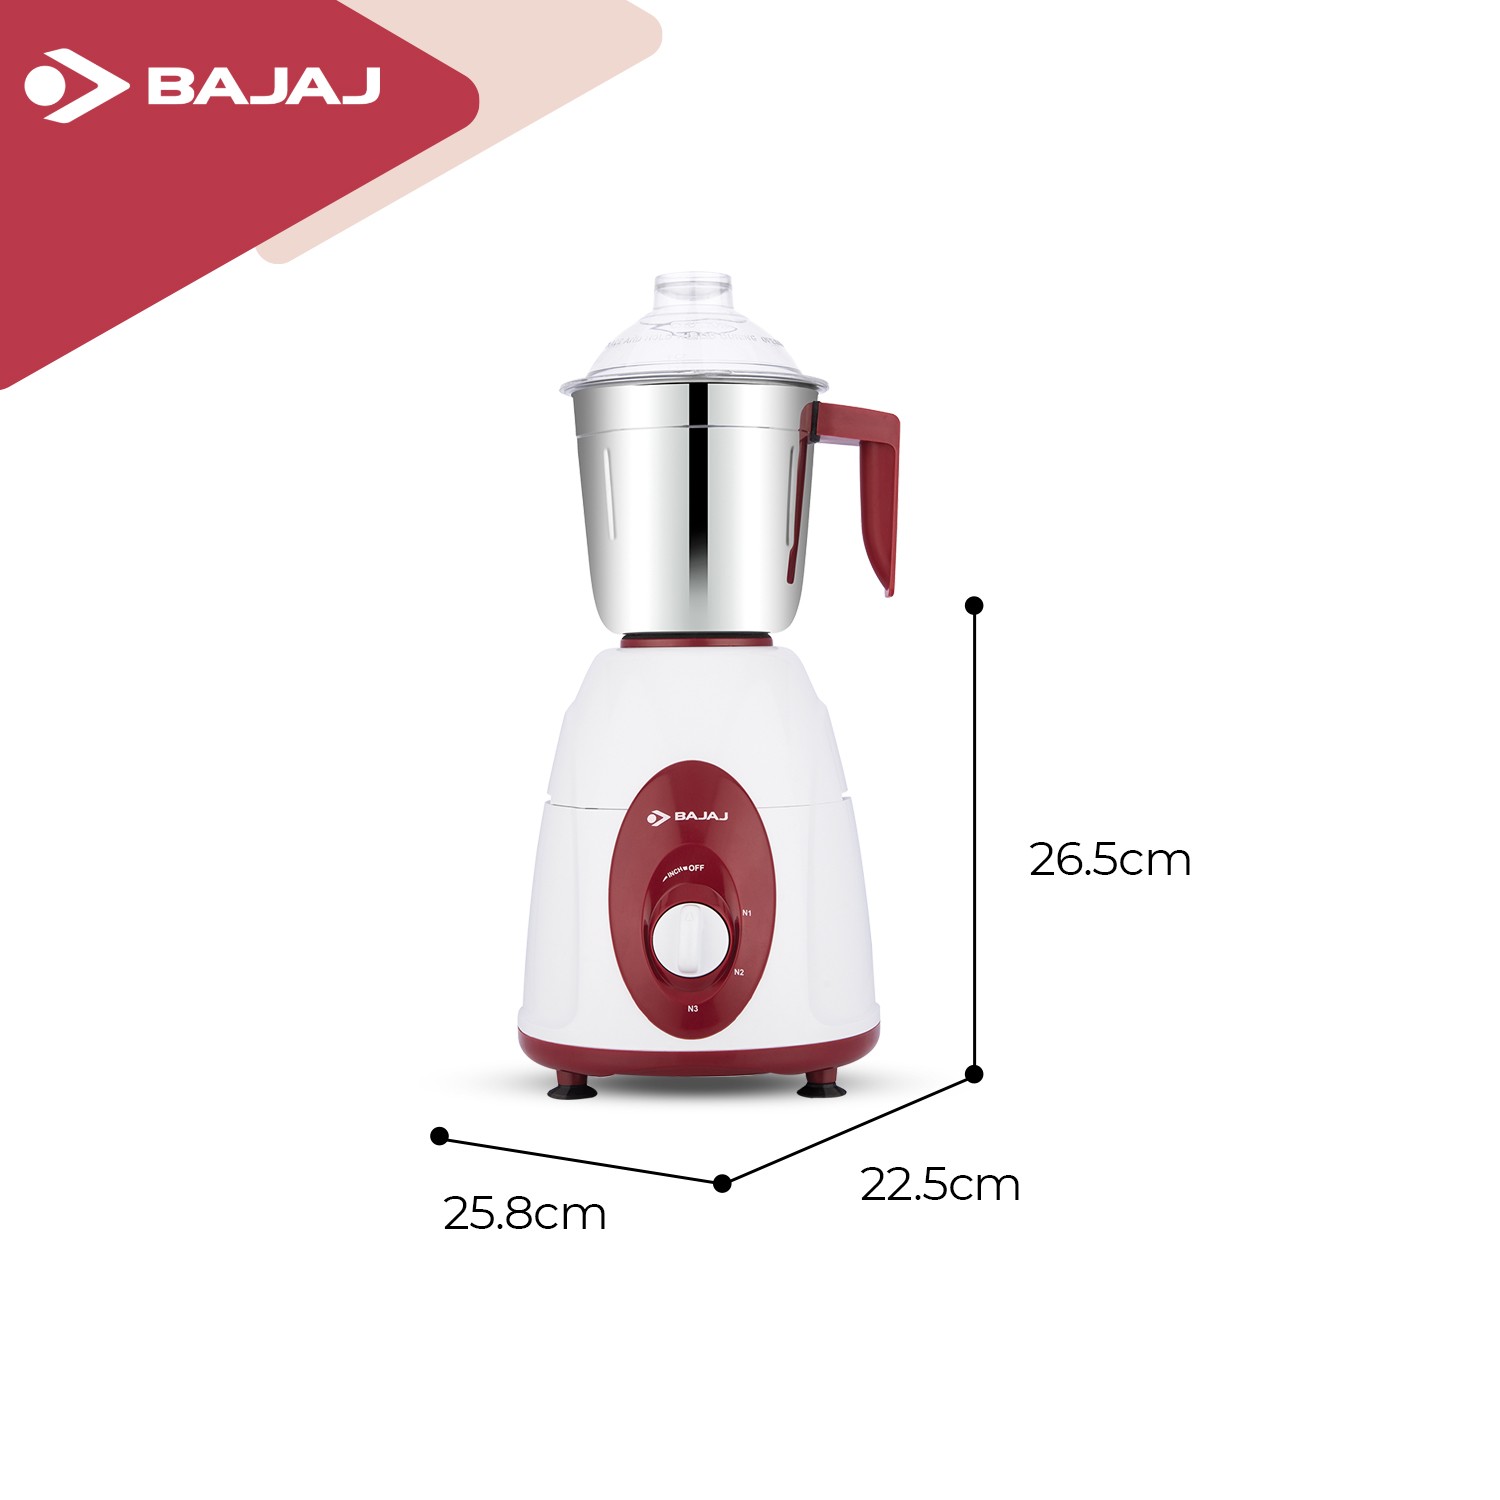 bajaj-classic-pro-600w-indian-mixer-grinder-with-special-chef-jar-stainless-steel-jars-indian-mixer-grinder-spice-coffee-grinder-110v-for-use-in-canada-usa5